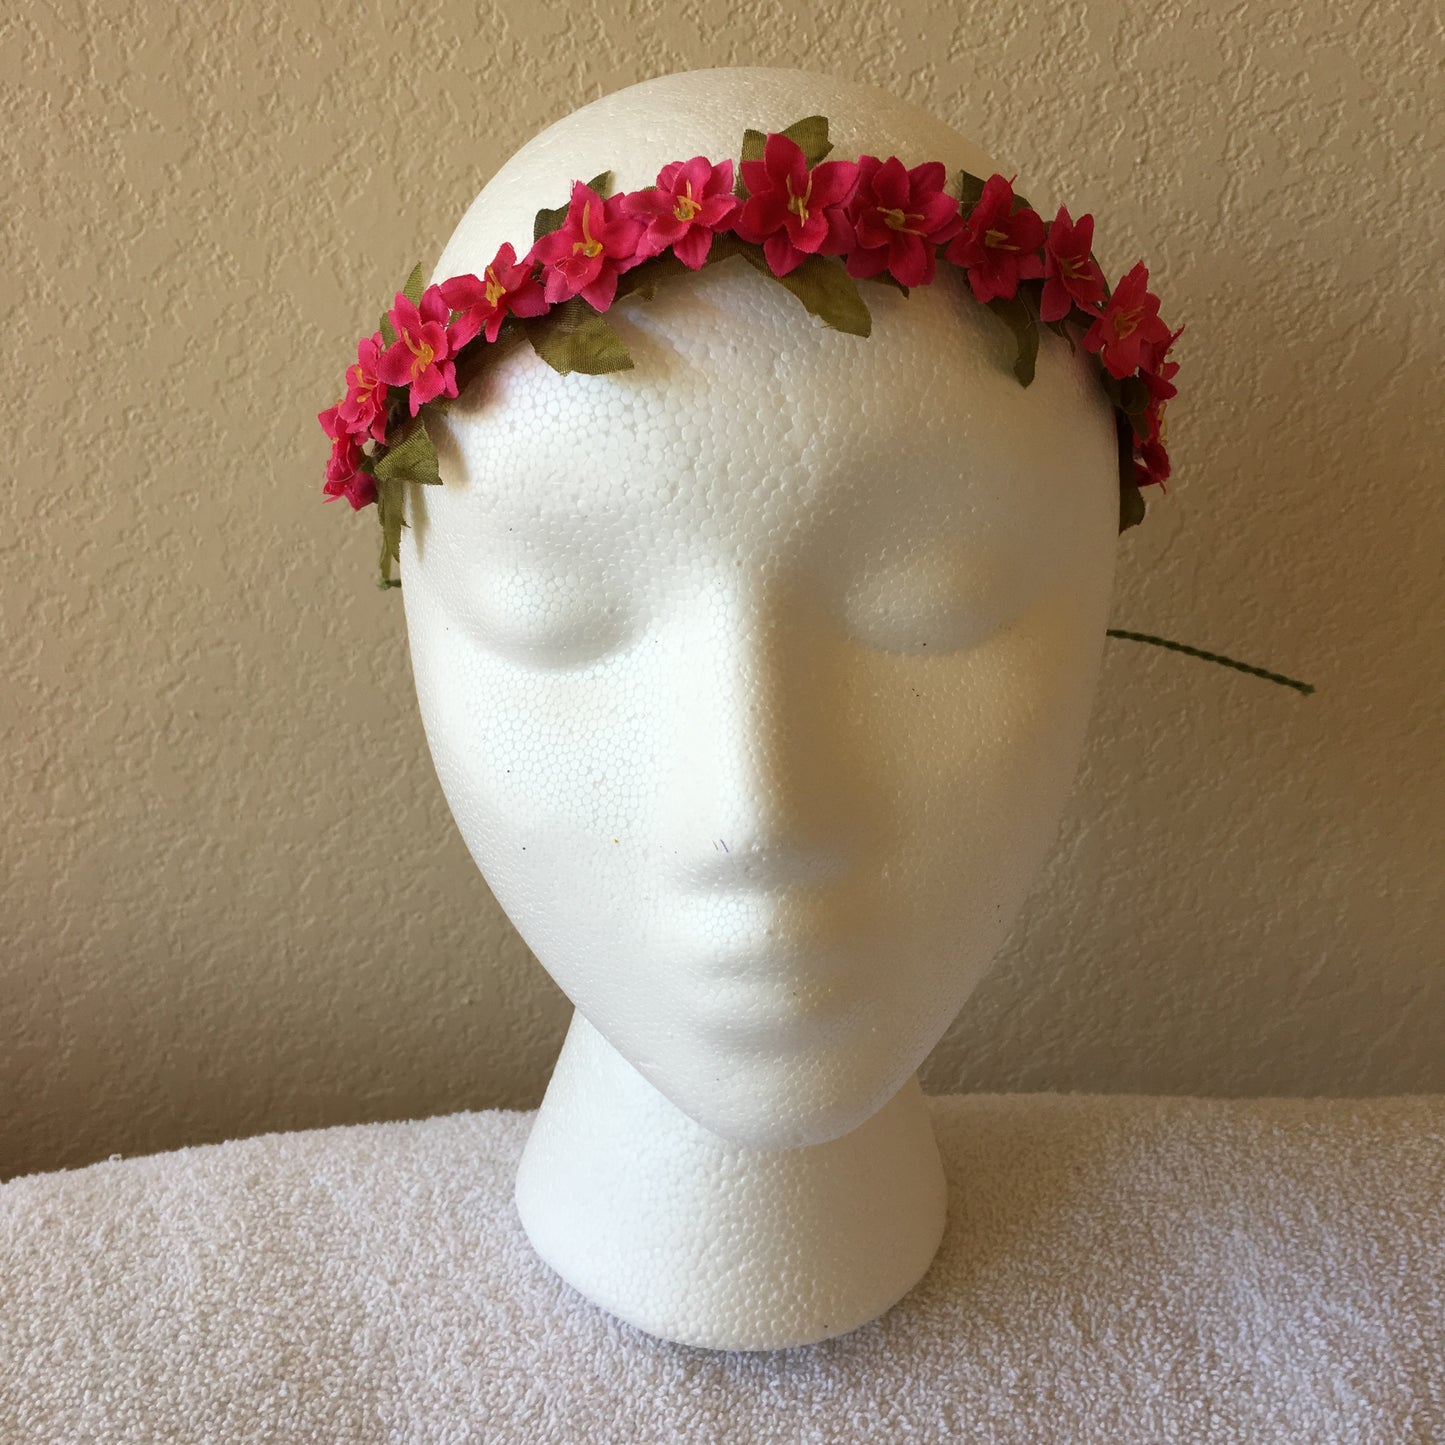 Extra Small Wreath - Hot pink mini flowers